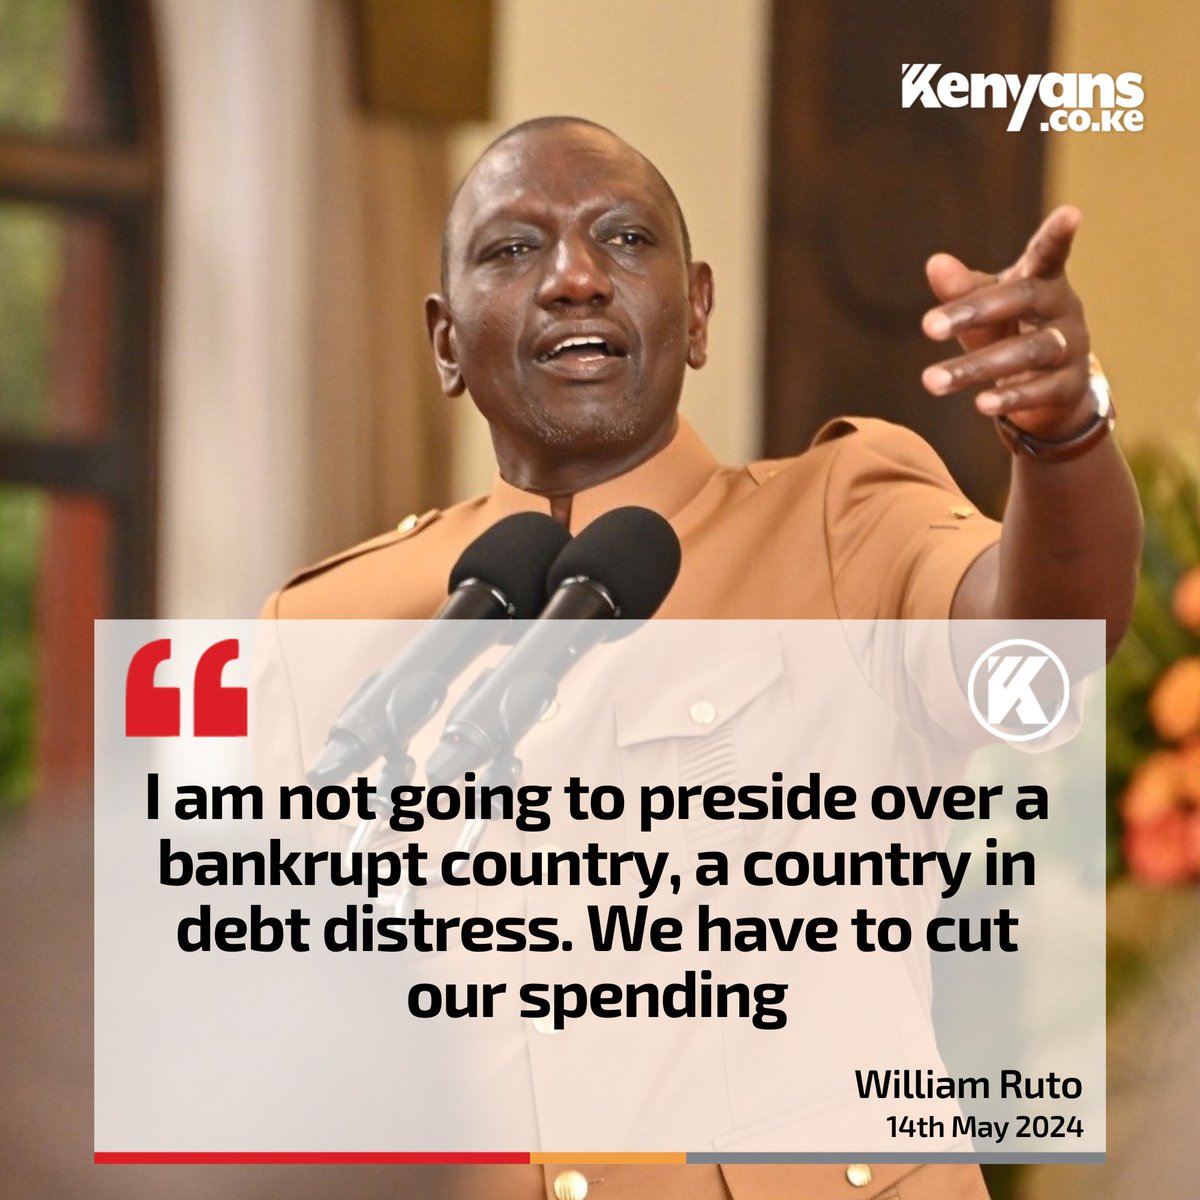 I am not going to preside over a bankrupt country - President Ruto